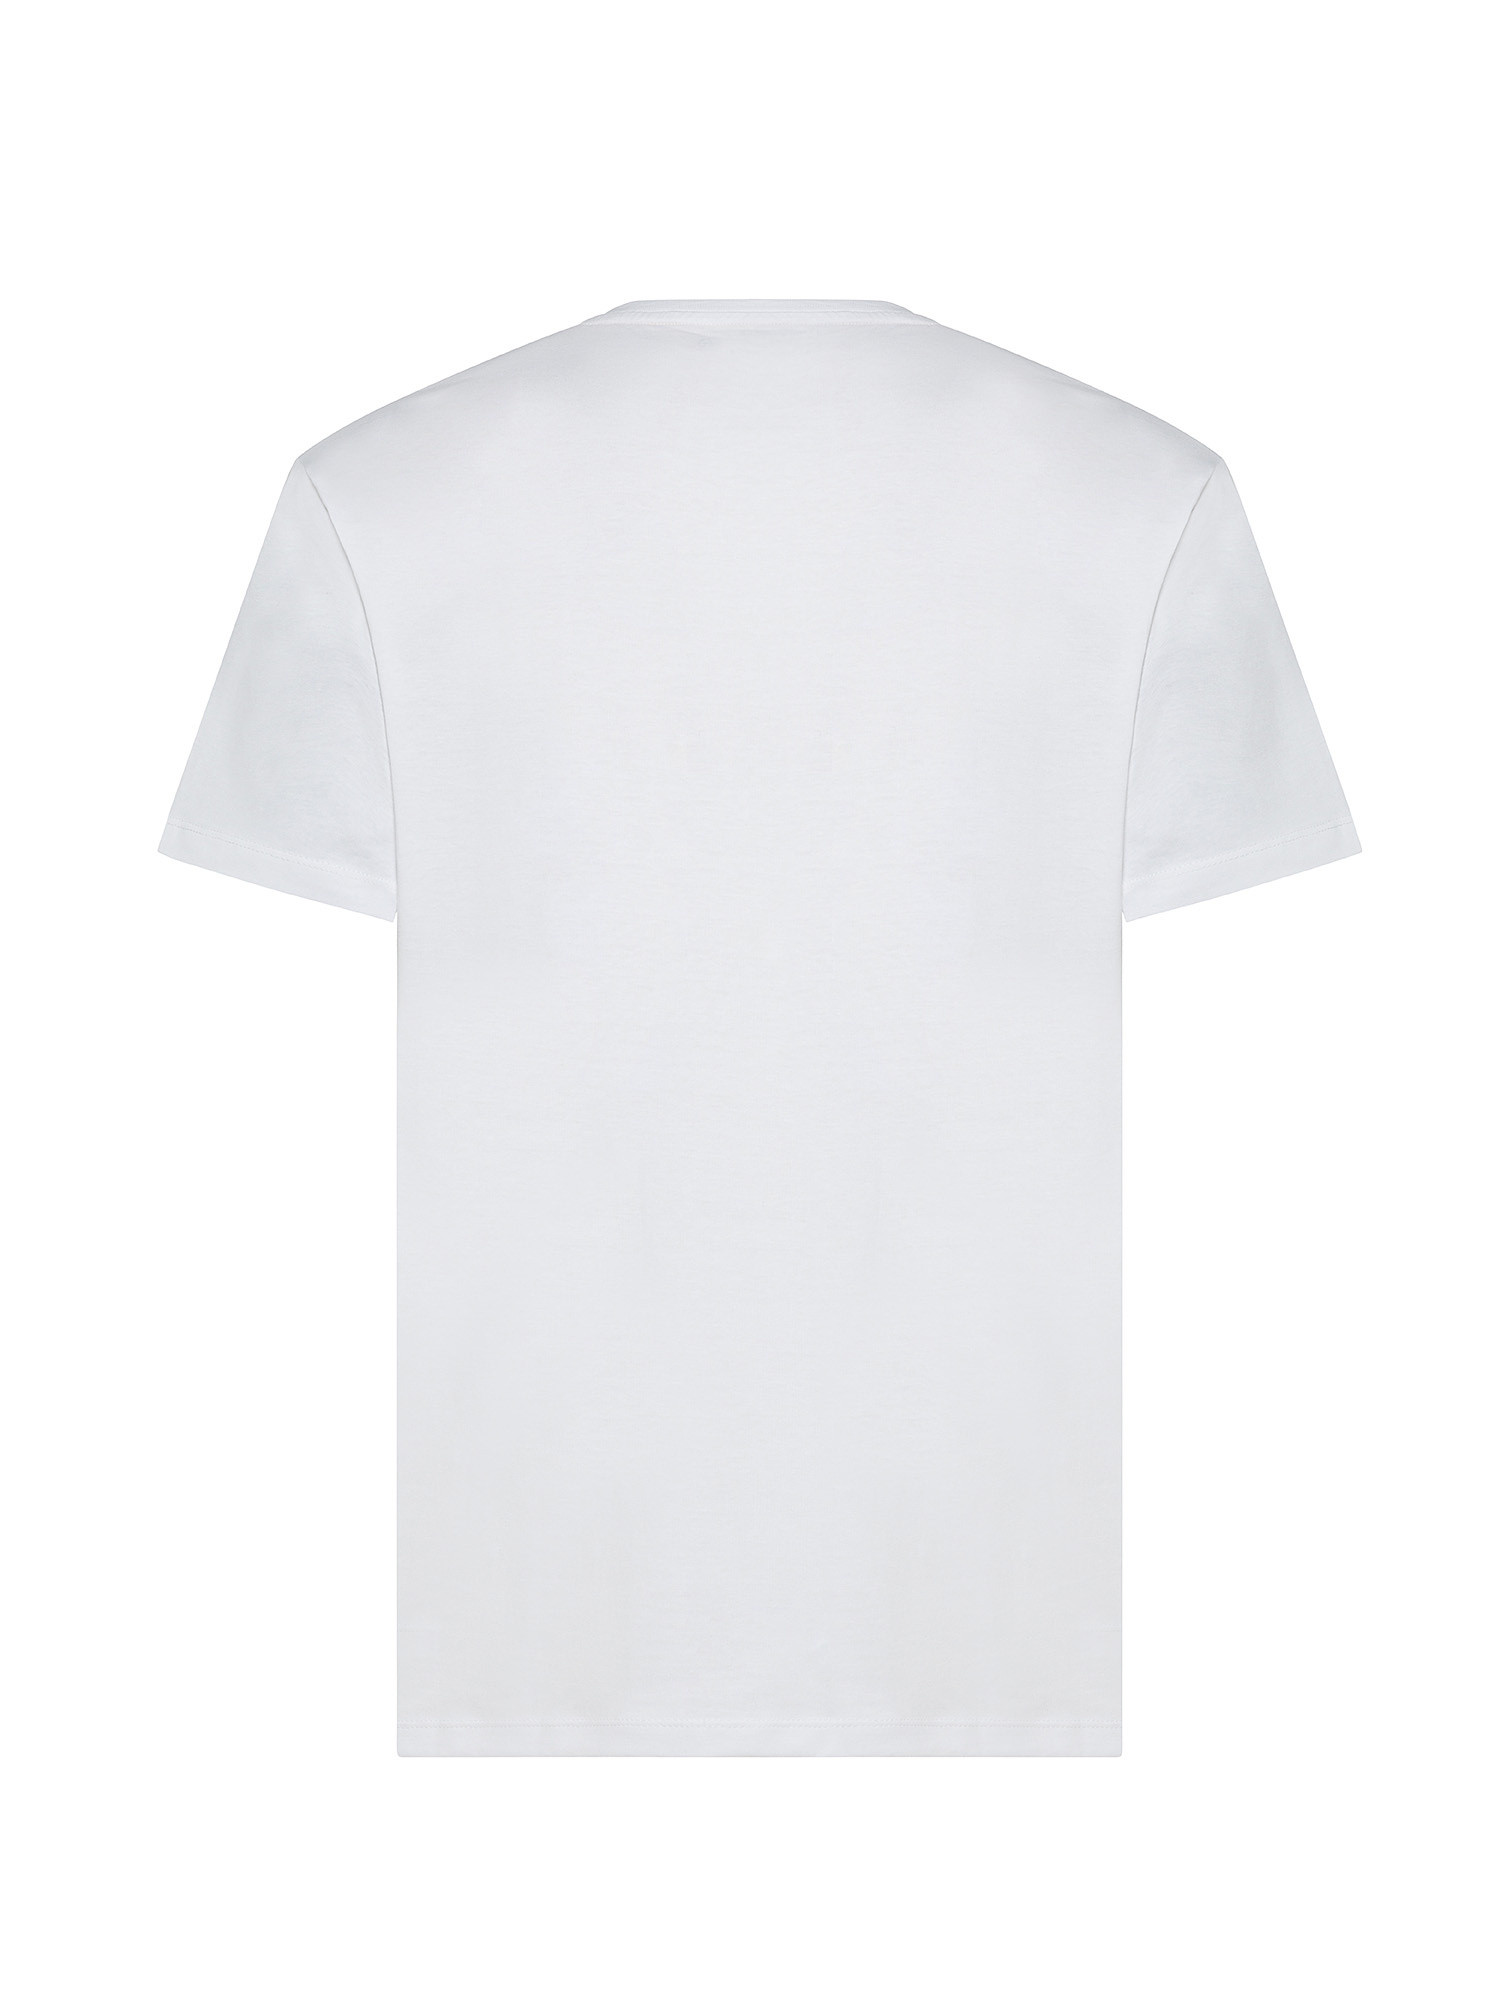 Pepe Jeans - Cotton T-shirt with print and logo, White, large image number 1